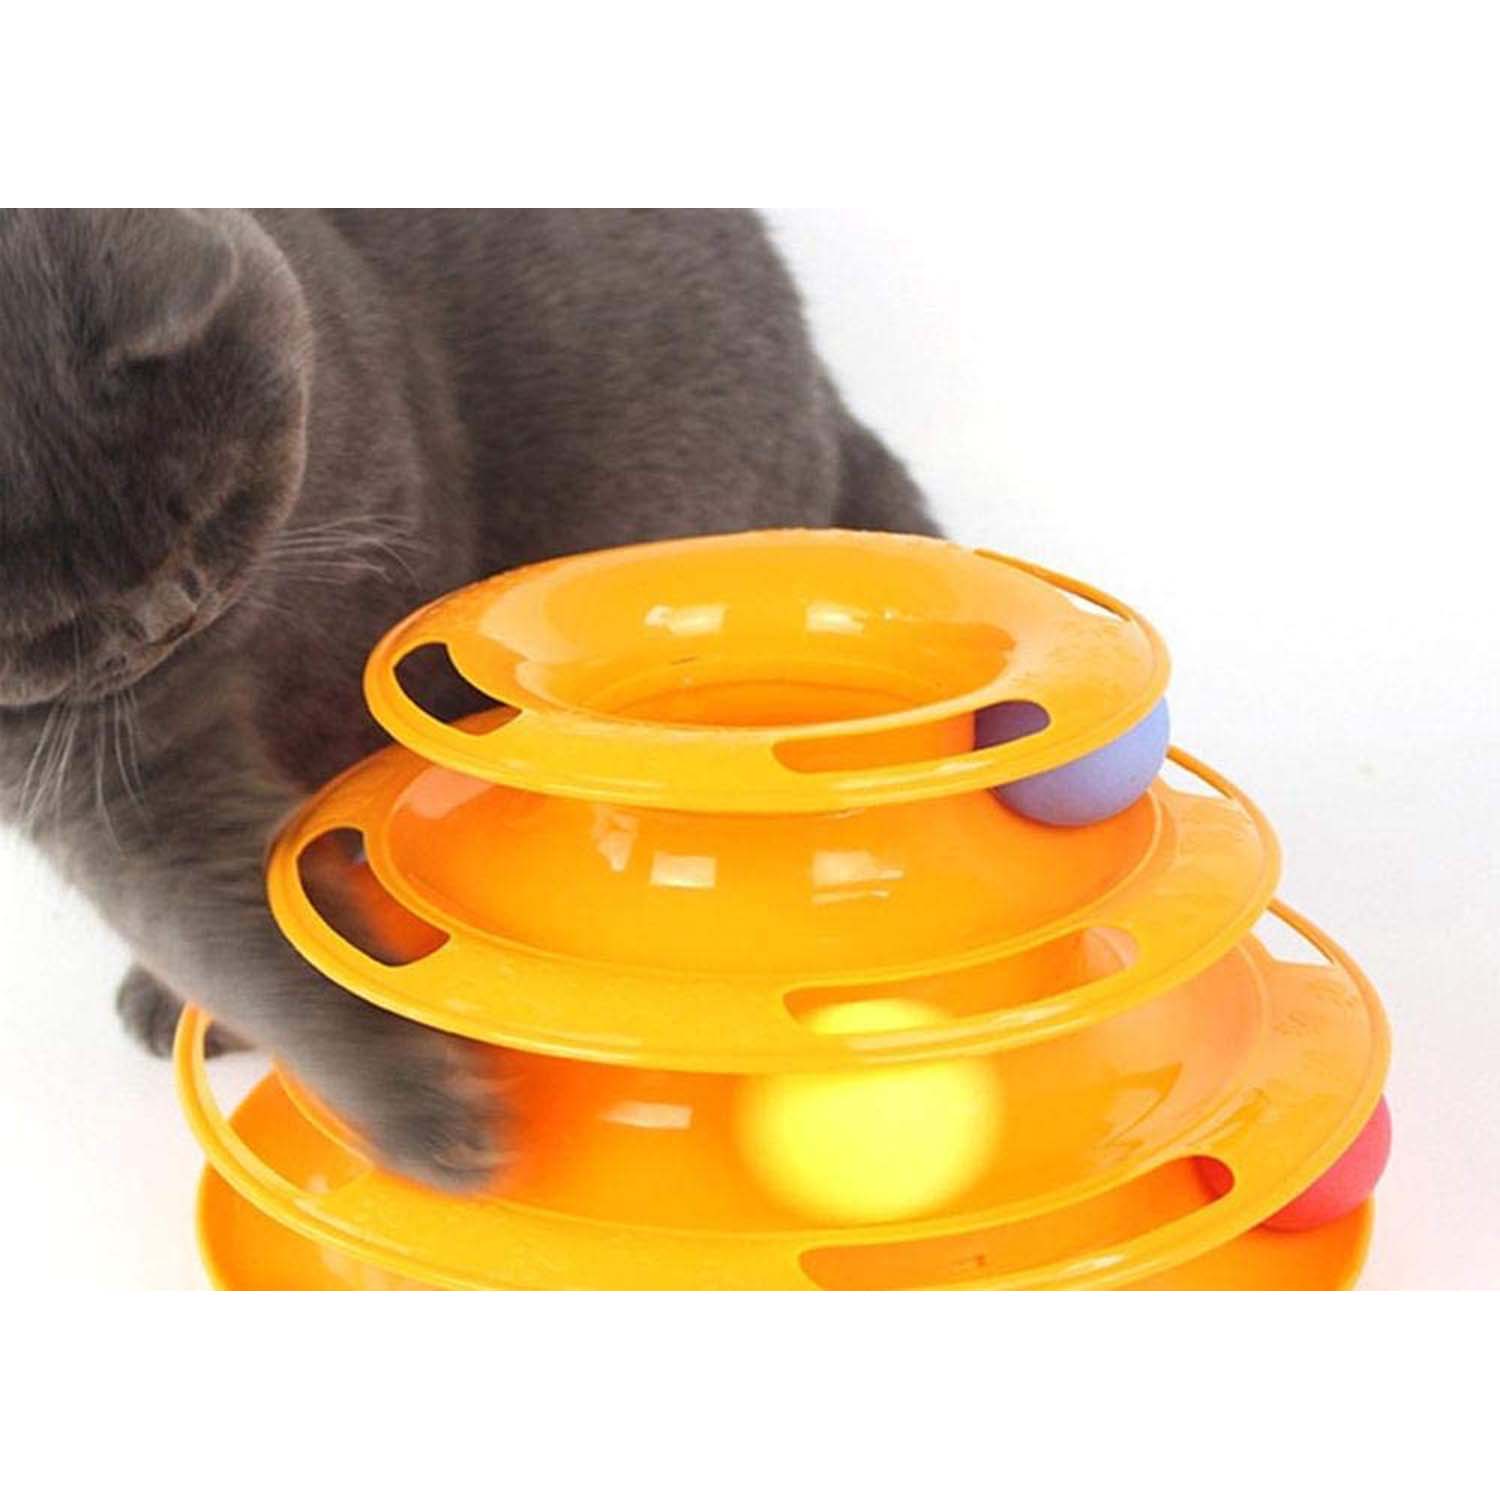 Funny Plastic Cat Pet Toy Lovely Three Levels Tower Tracks Disc Cat Toy Balls US 